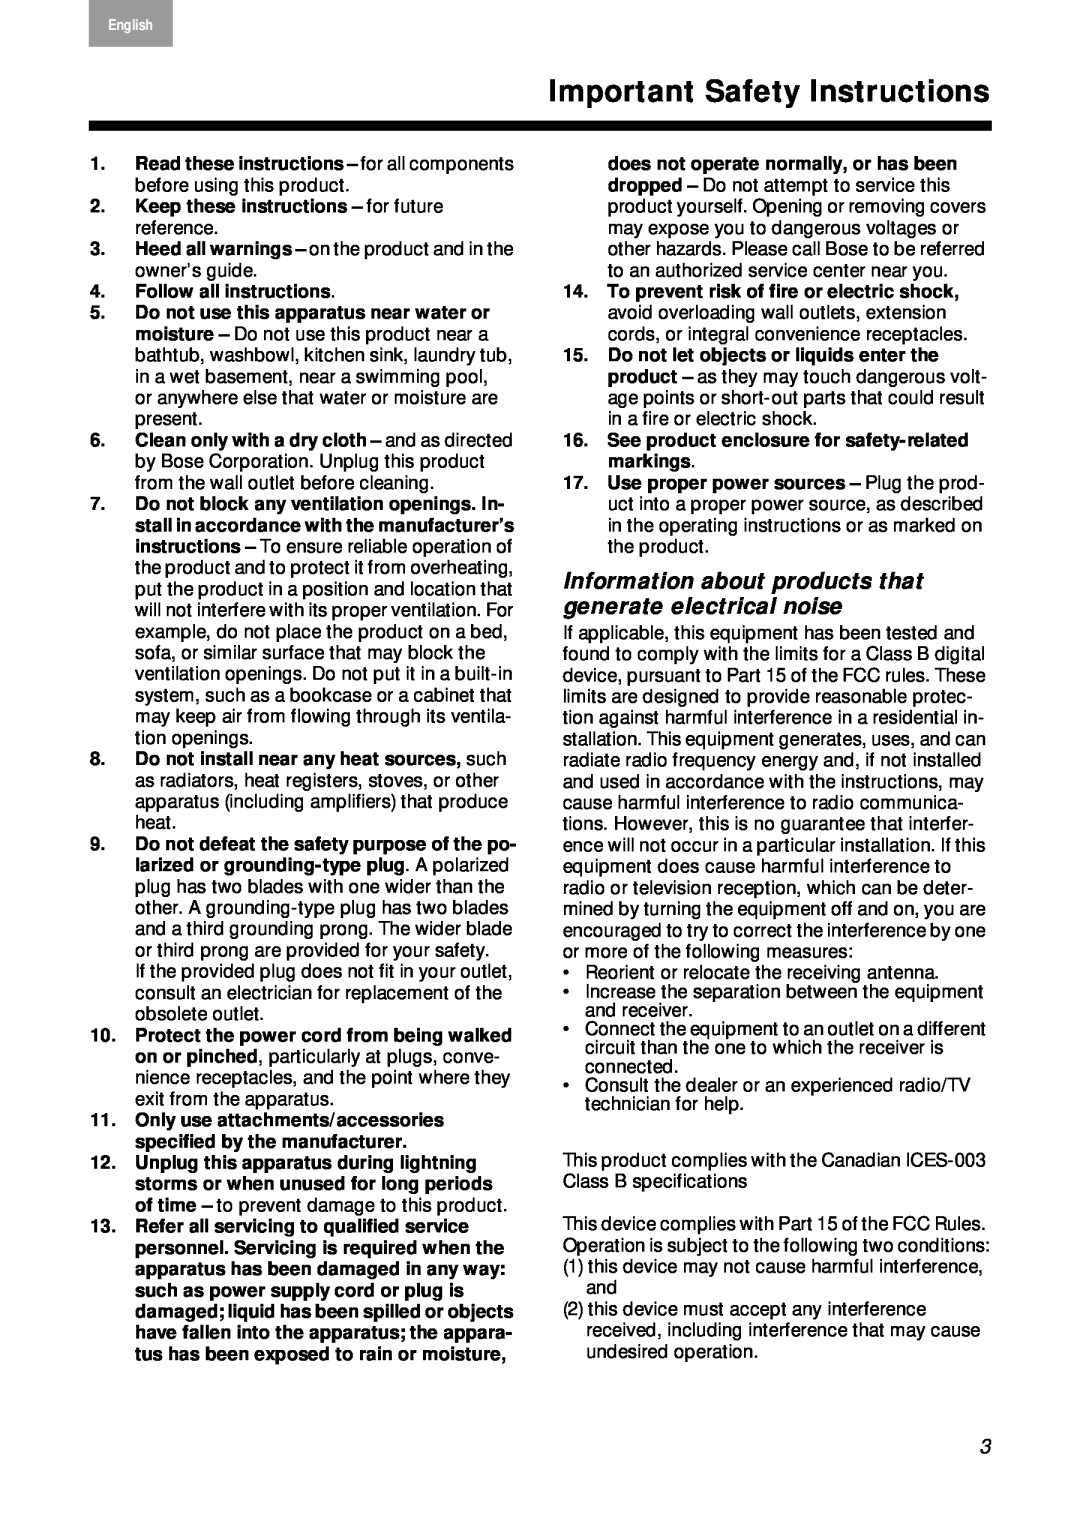 Bose 40274, 2 Series II manual Important Safety Instructions 